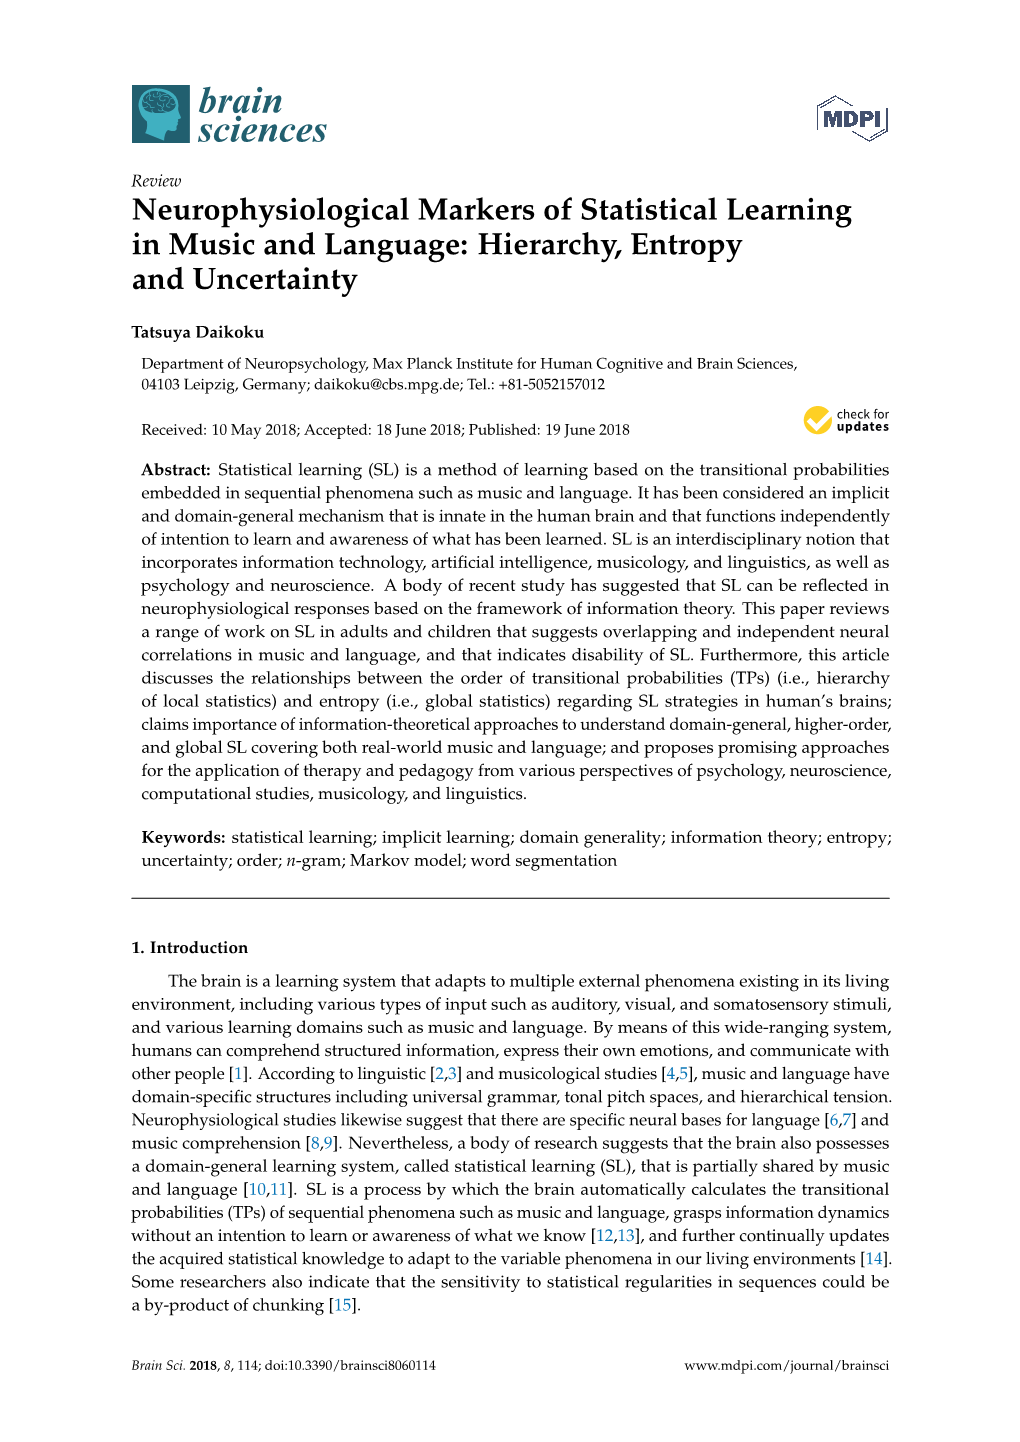 Neurophysiological Markers of Statistical Learning in Music and Language: Hierarchy, Entropy and Uncertainty